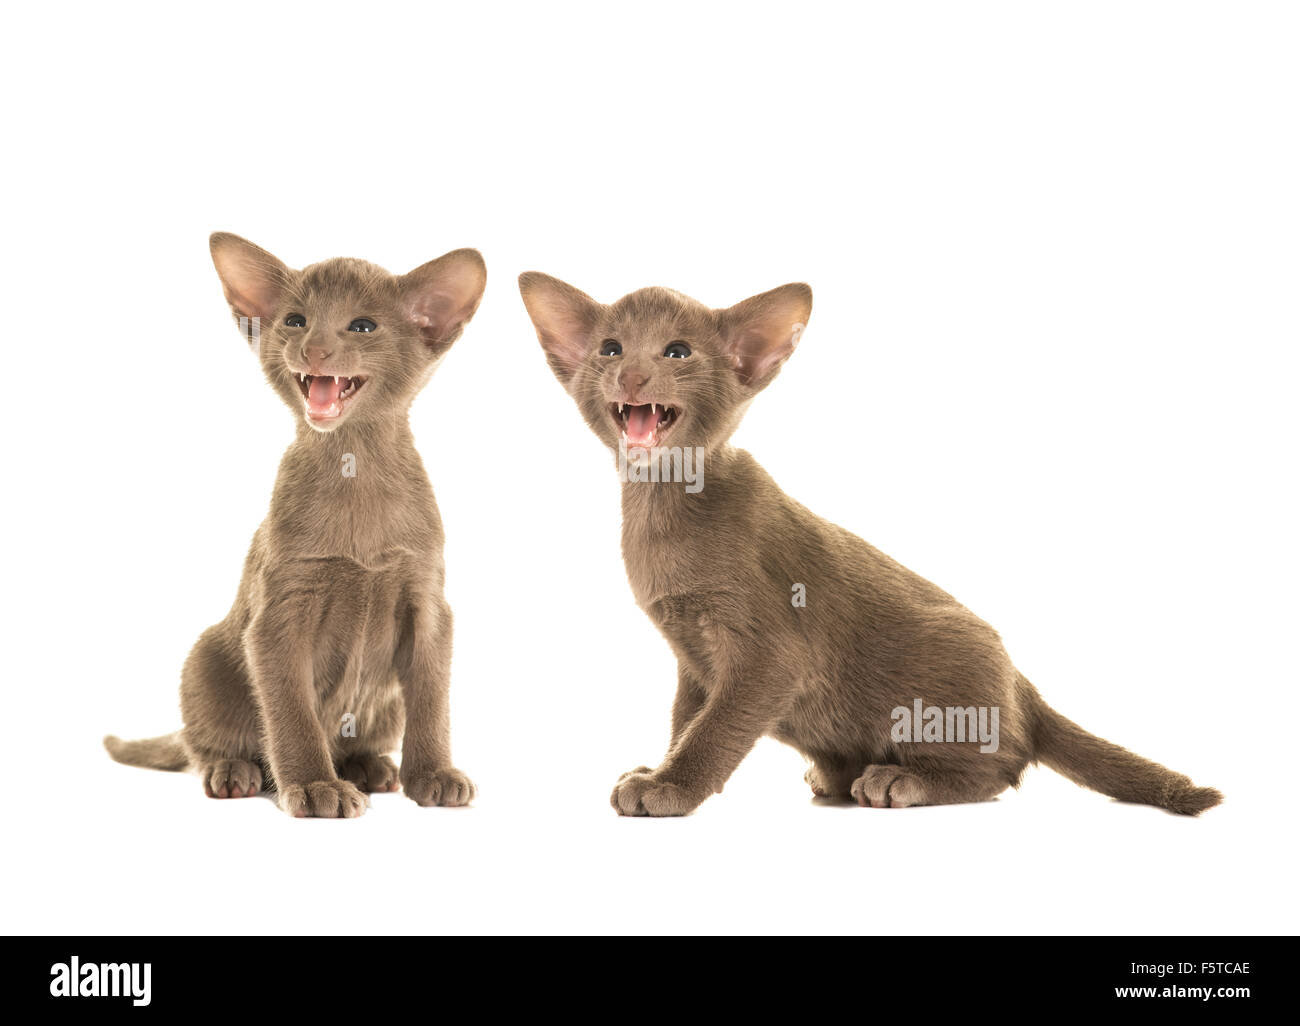 Cute sitting speaking siamese cats on a white background Stock Photo